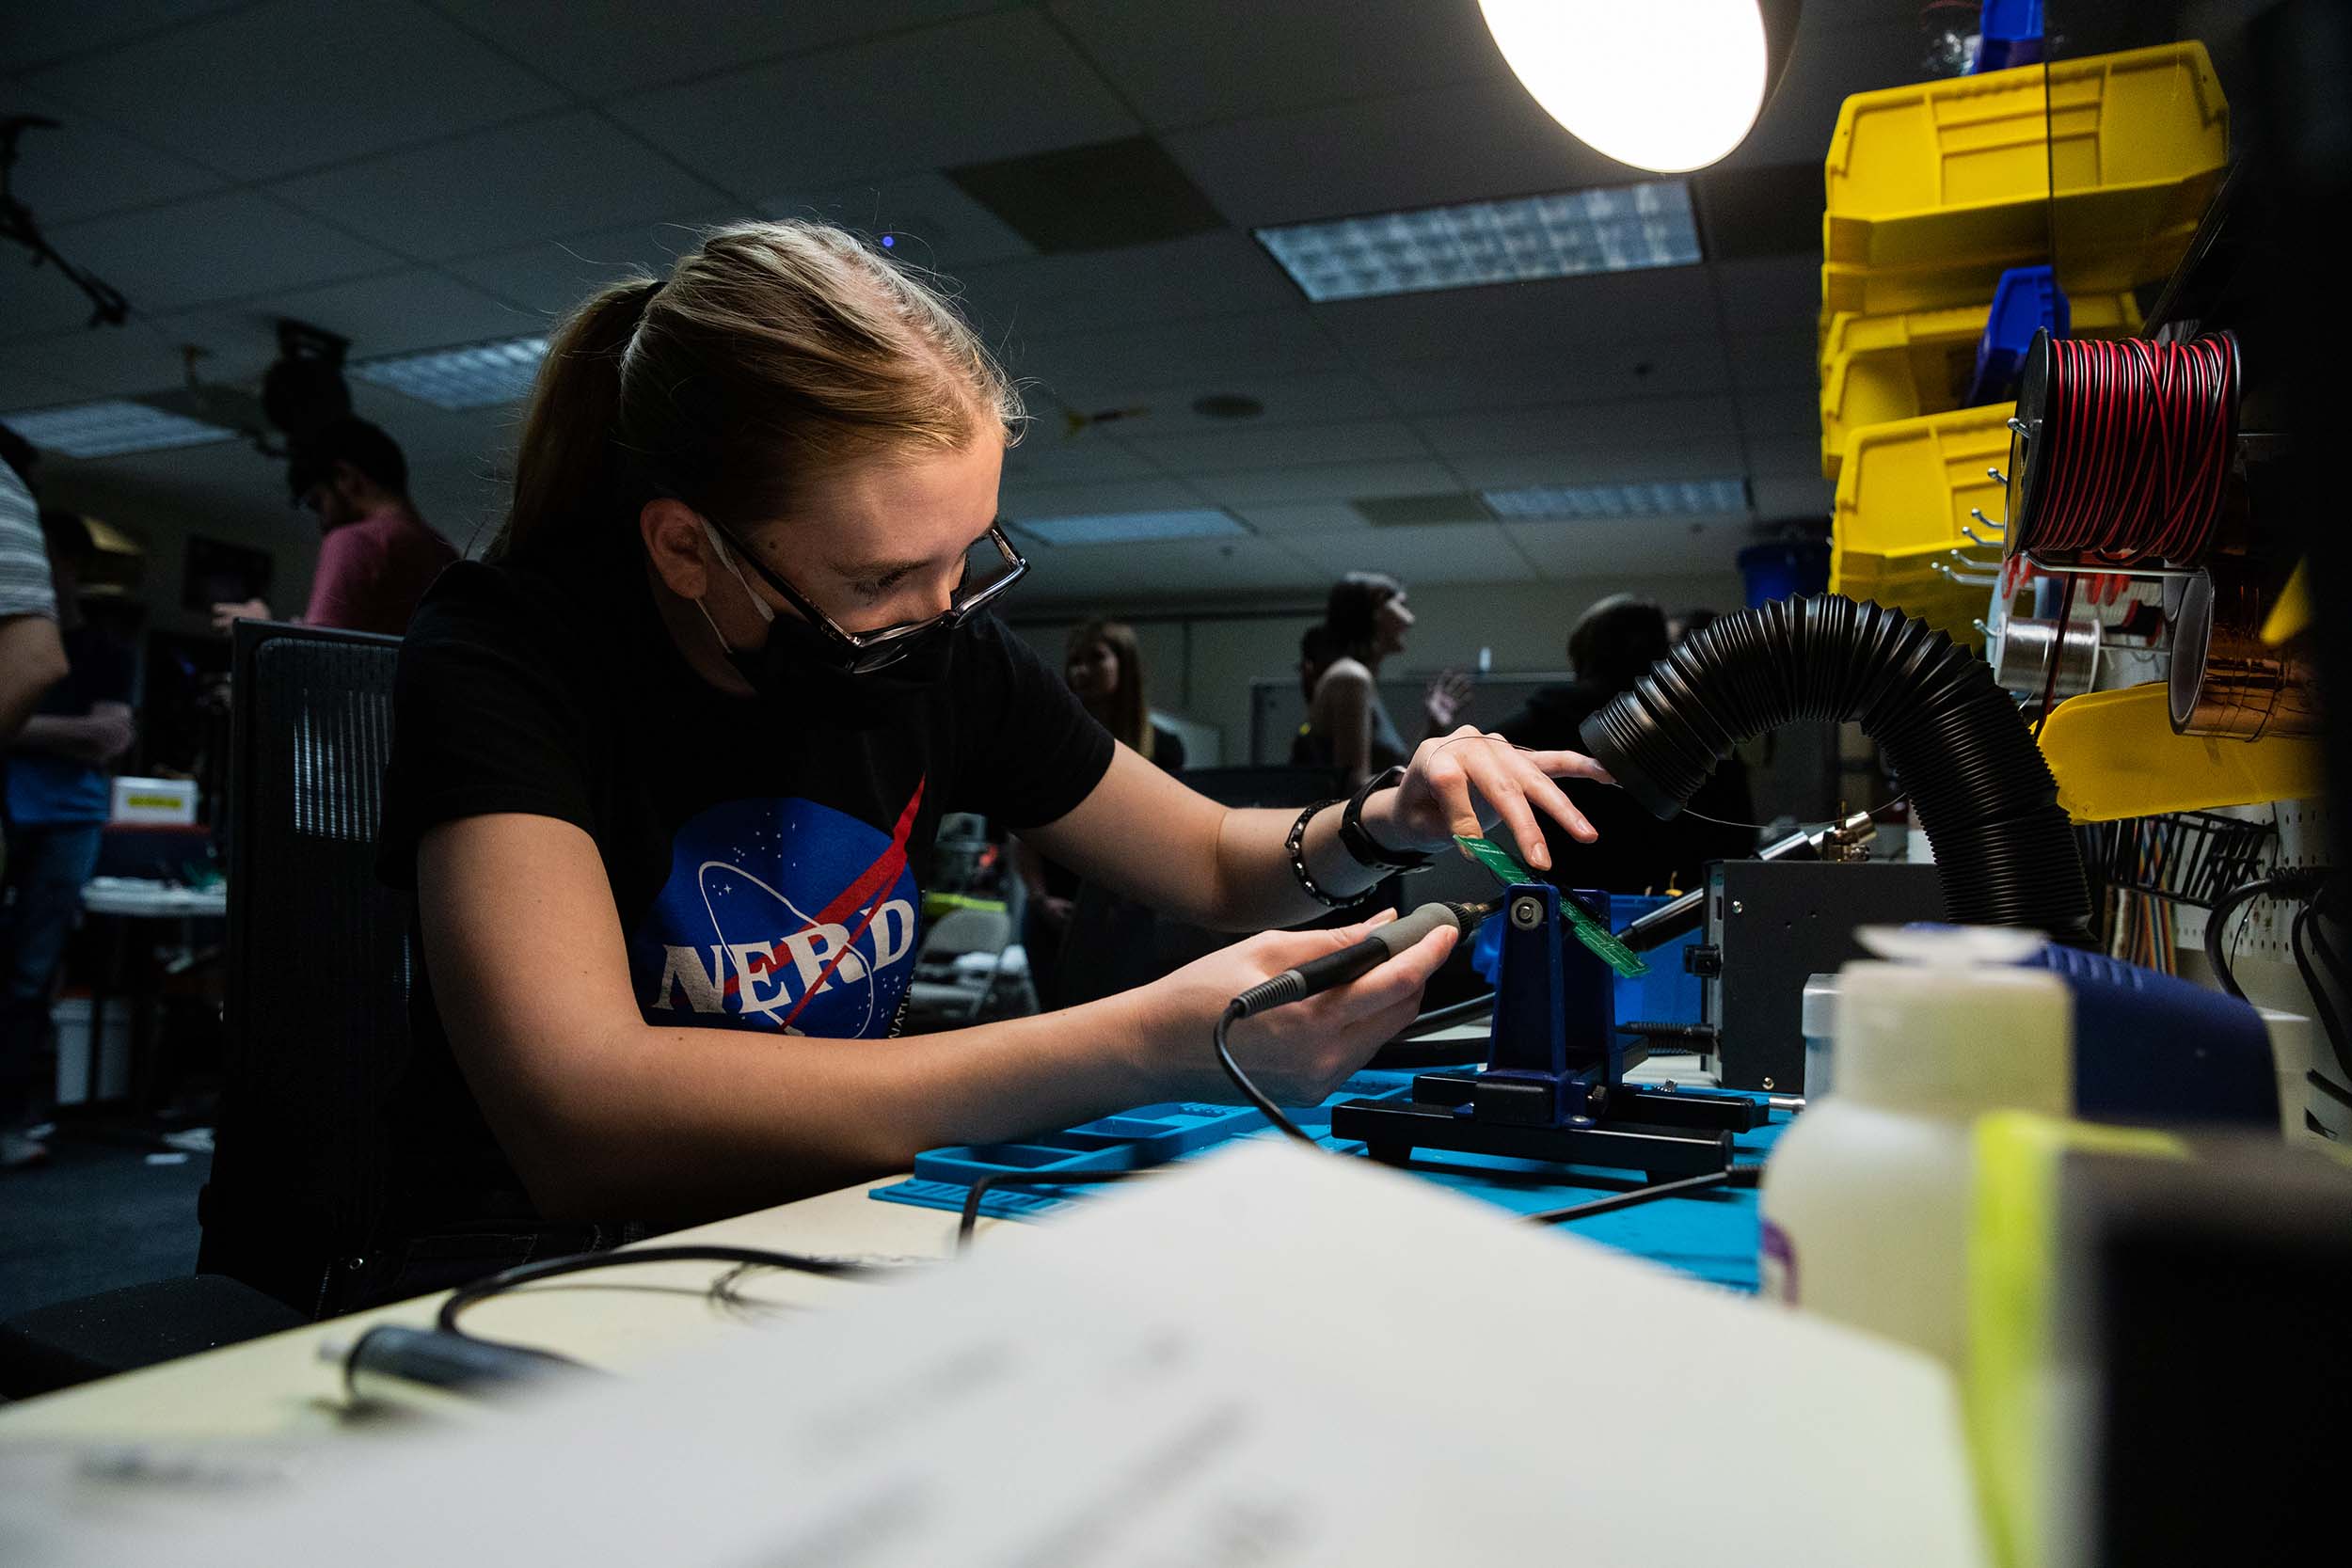 A female student wears a shirt bearing an altered "NASA" logo with "nerd" replacing "NASA," while soldering in the Luminosity Lab.